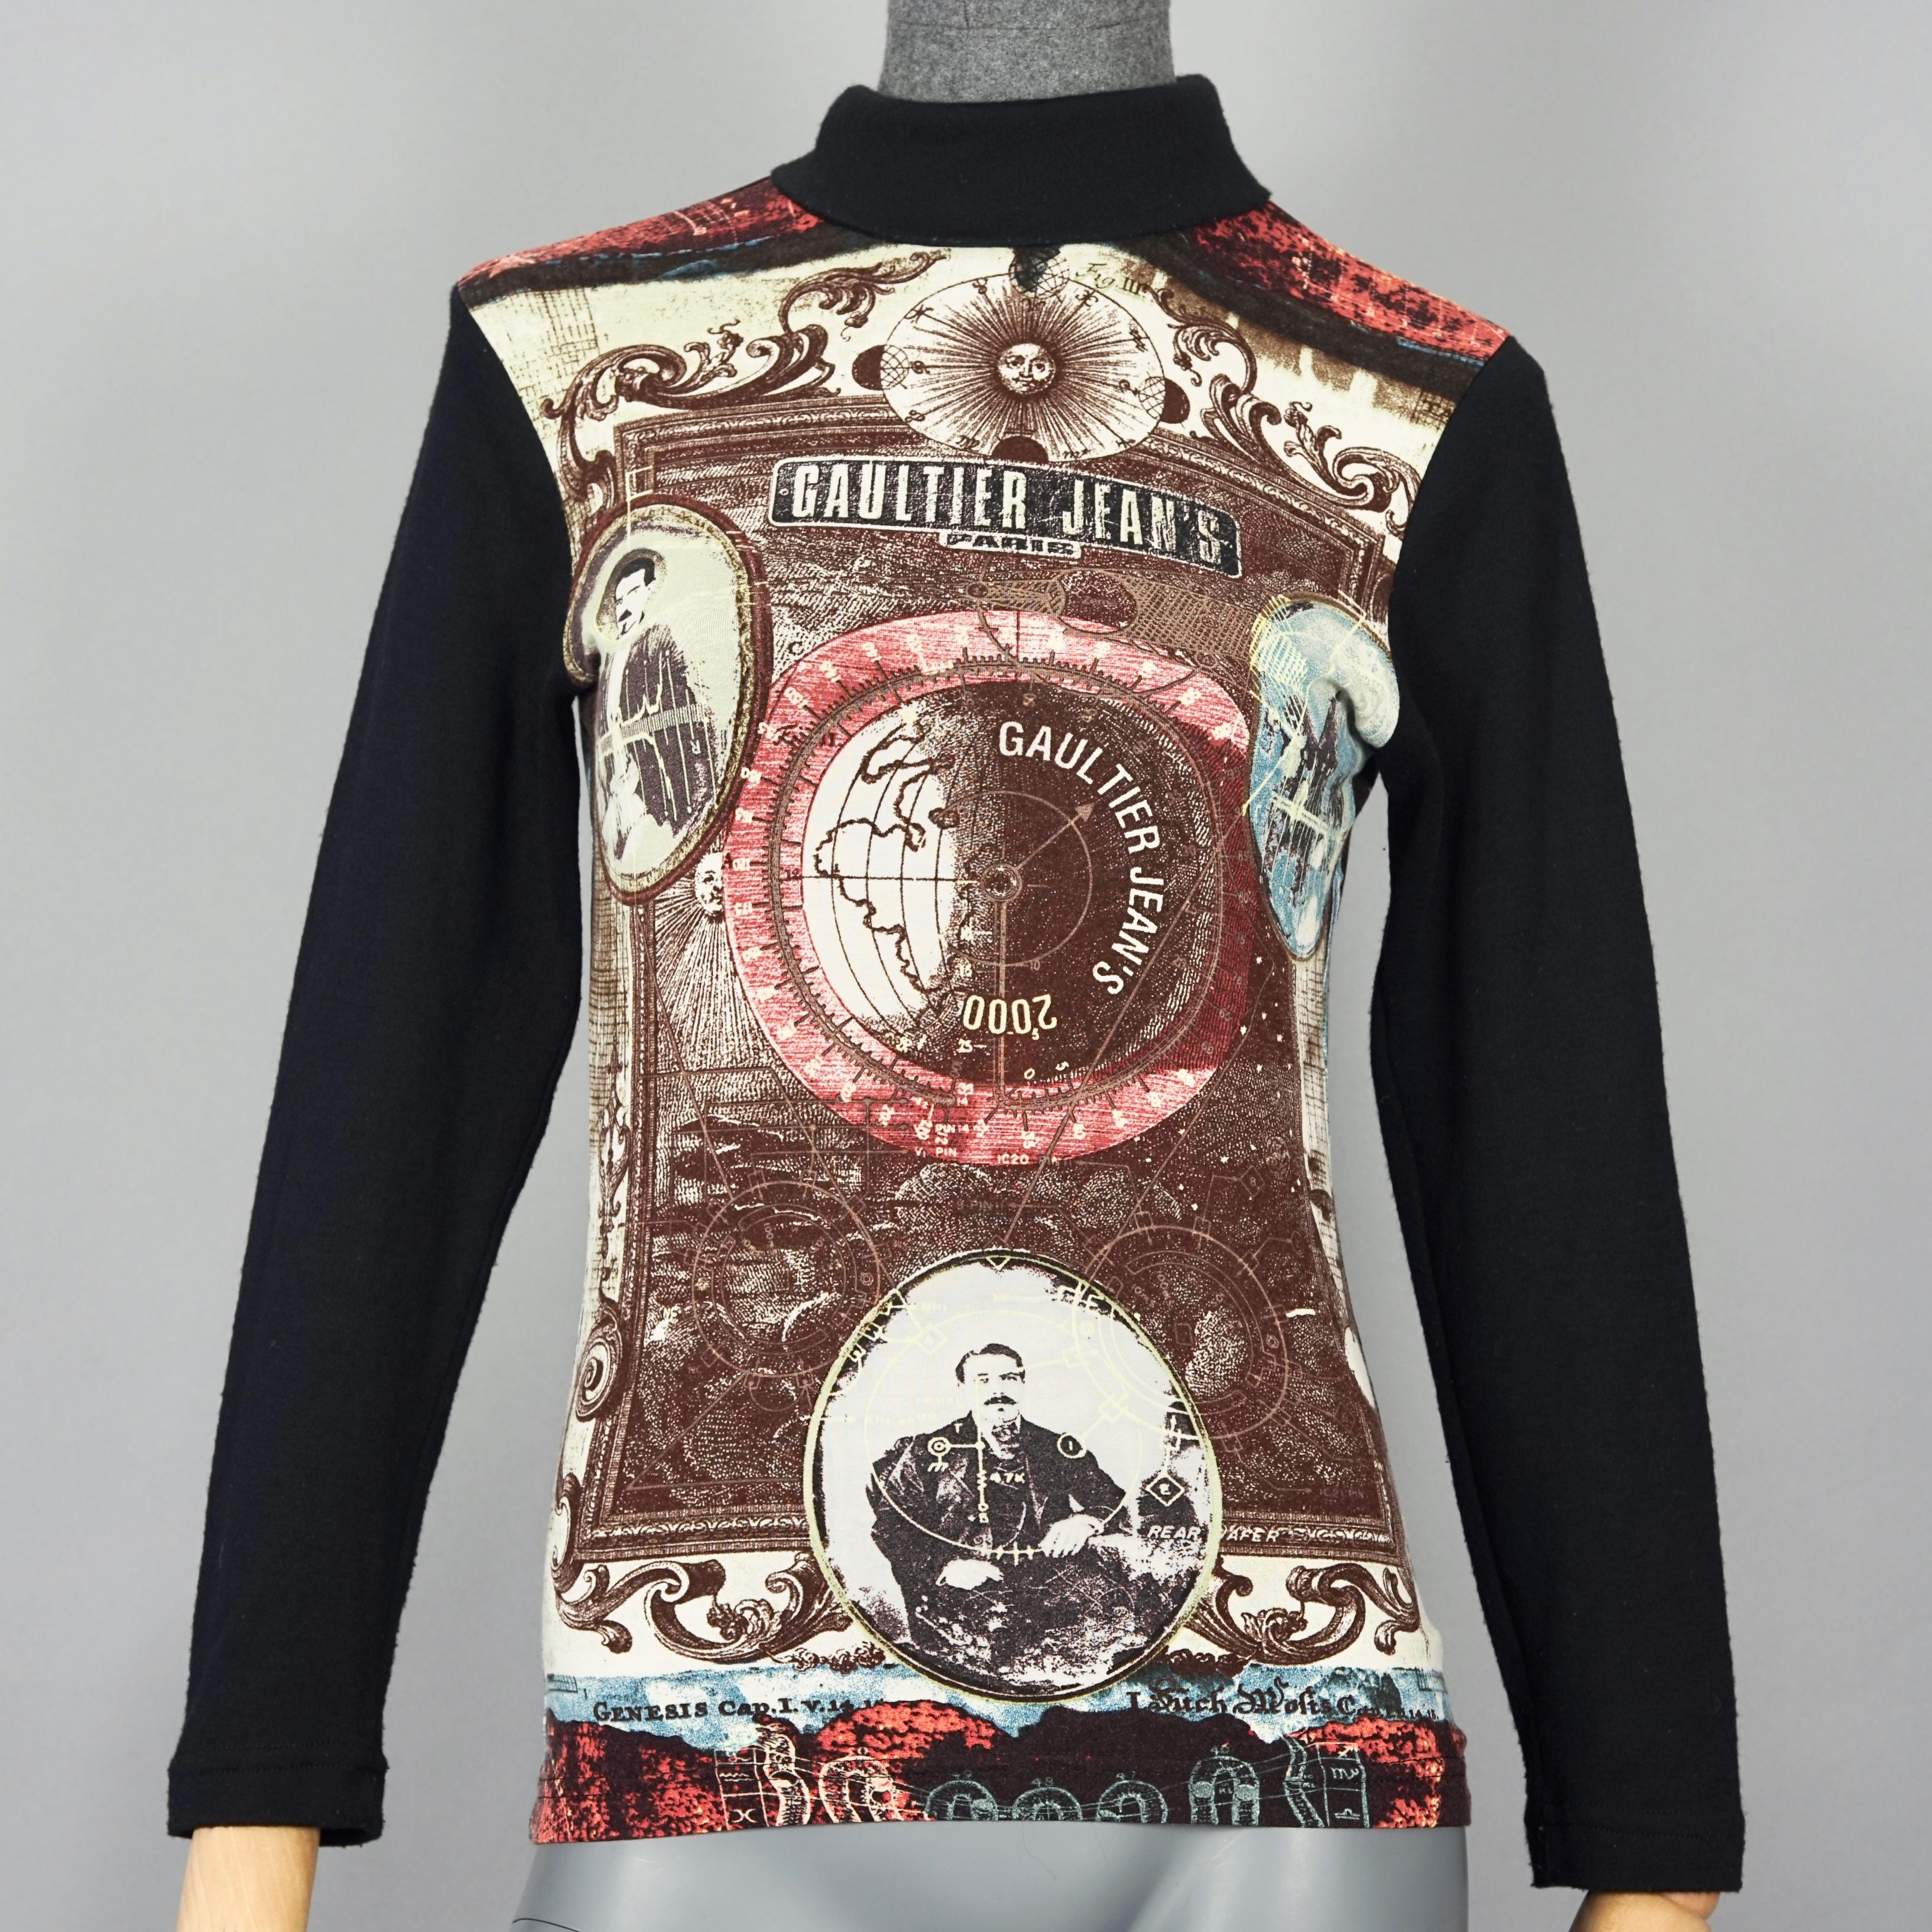 Vintage JEAN PAUL GAULTIER Novelty Collage Print Top

Measurements taken laid flat, please double bust and waist:
Shoulders: 14.17 inches (36 cm) 
Sleeves: 21.25 inches (54 cm)
Bust: 17.32 inches (44 cm)
Waist: 14.17 inches (36 cm) 
Length: 22.83